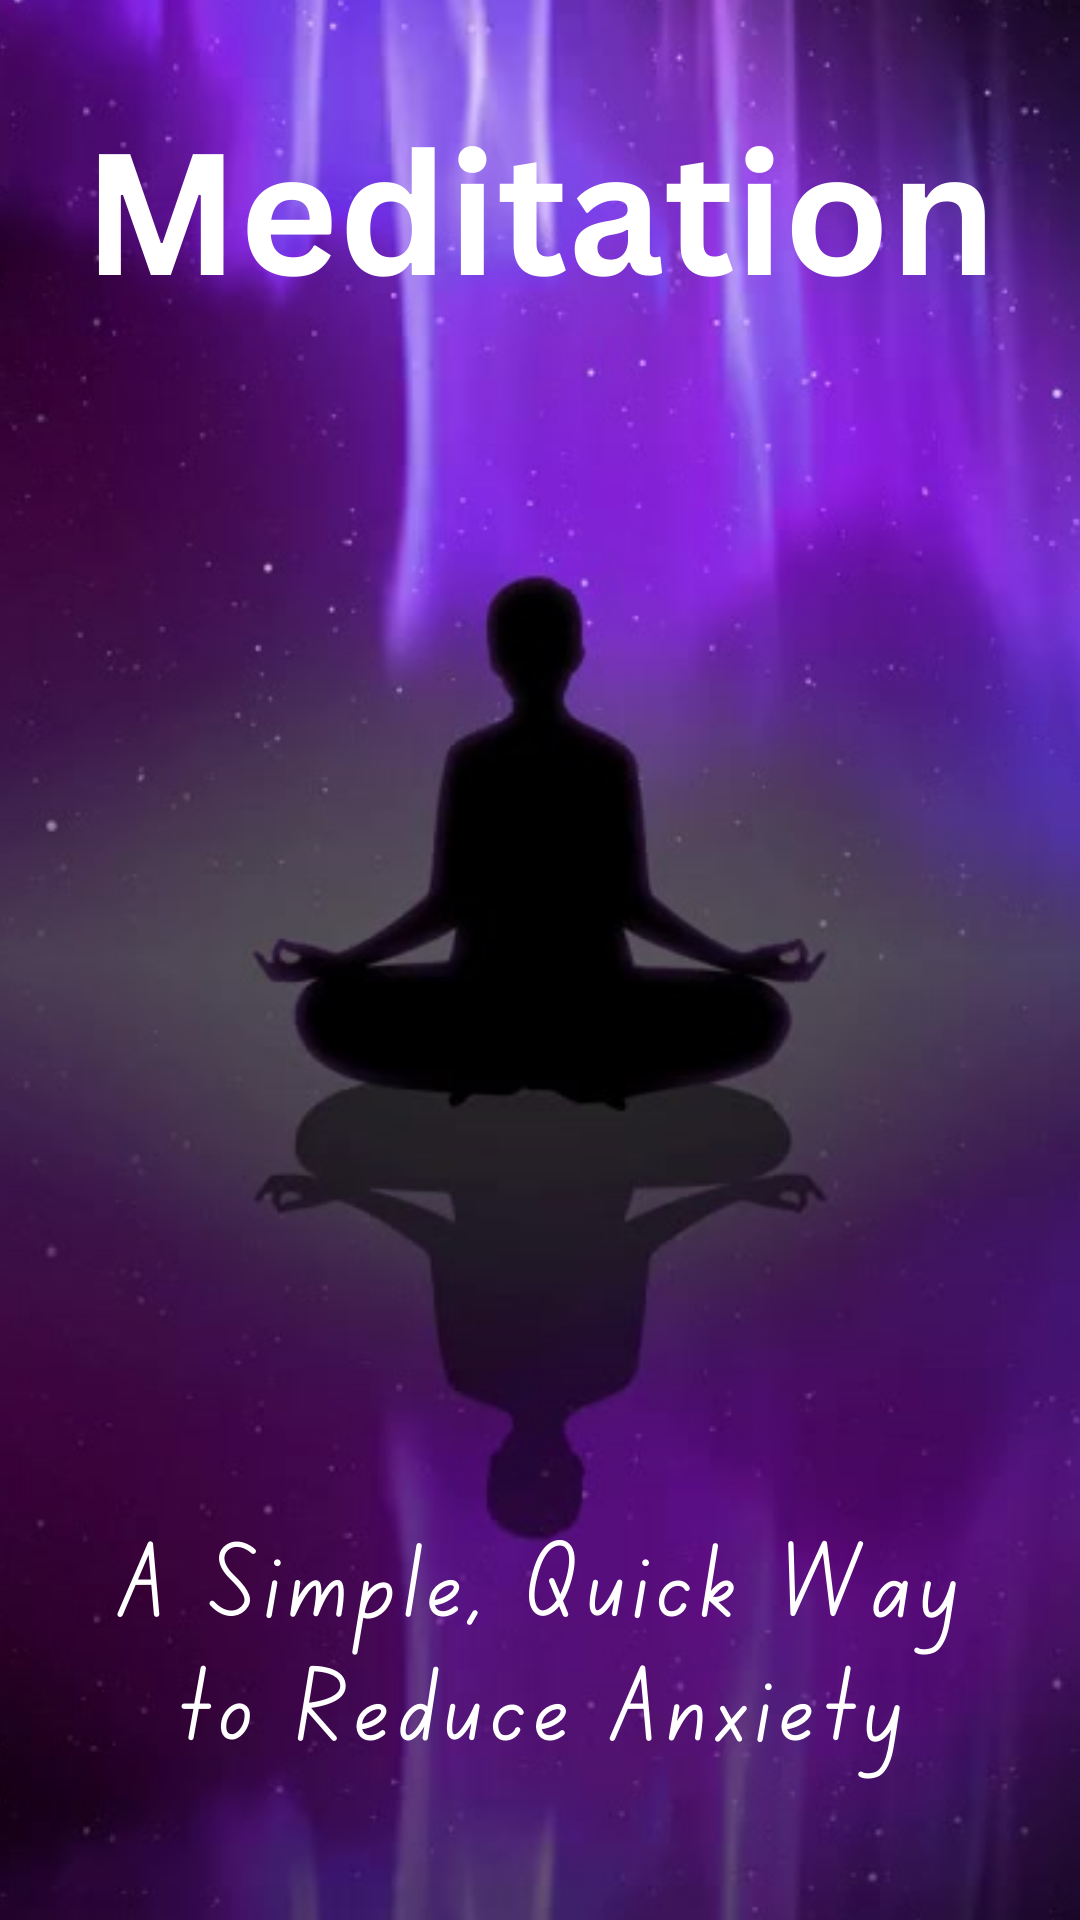 Meditation A Simple, Quick Way to Reduce Anxiety